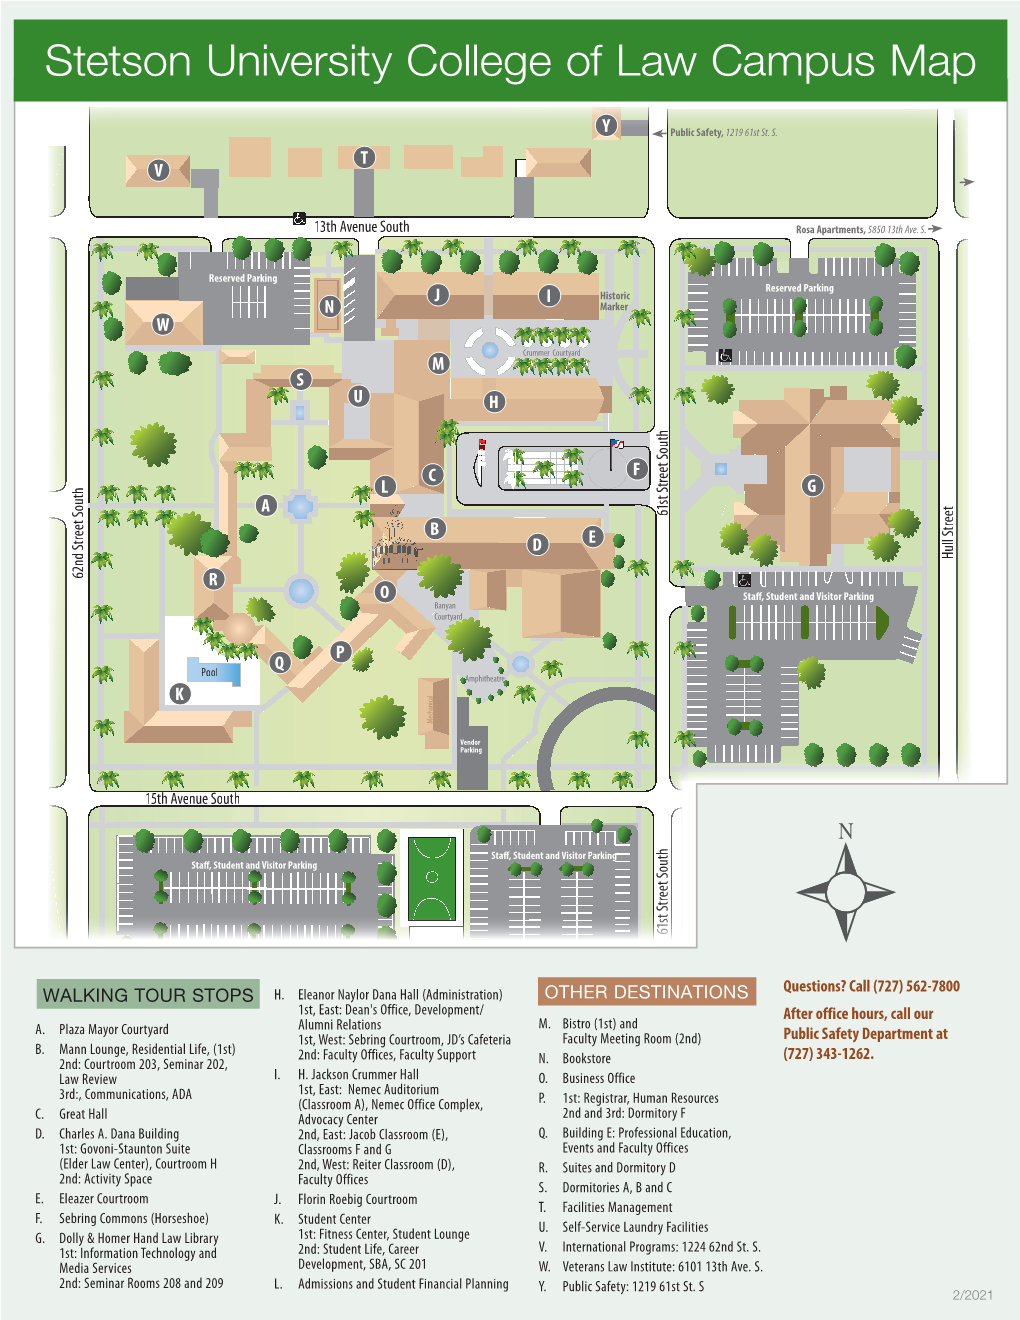 Stetson University College of Law Campus Map DocsLib